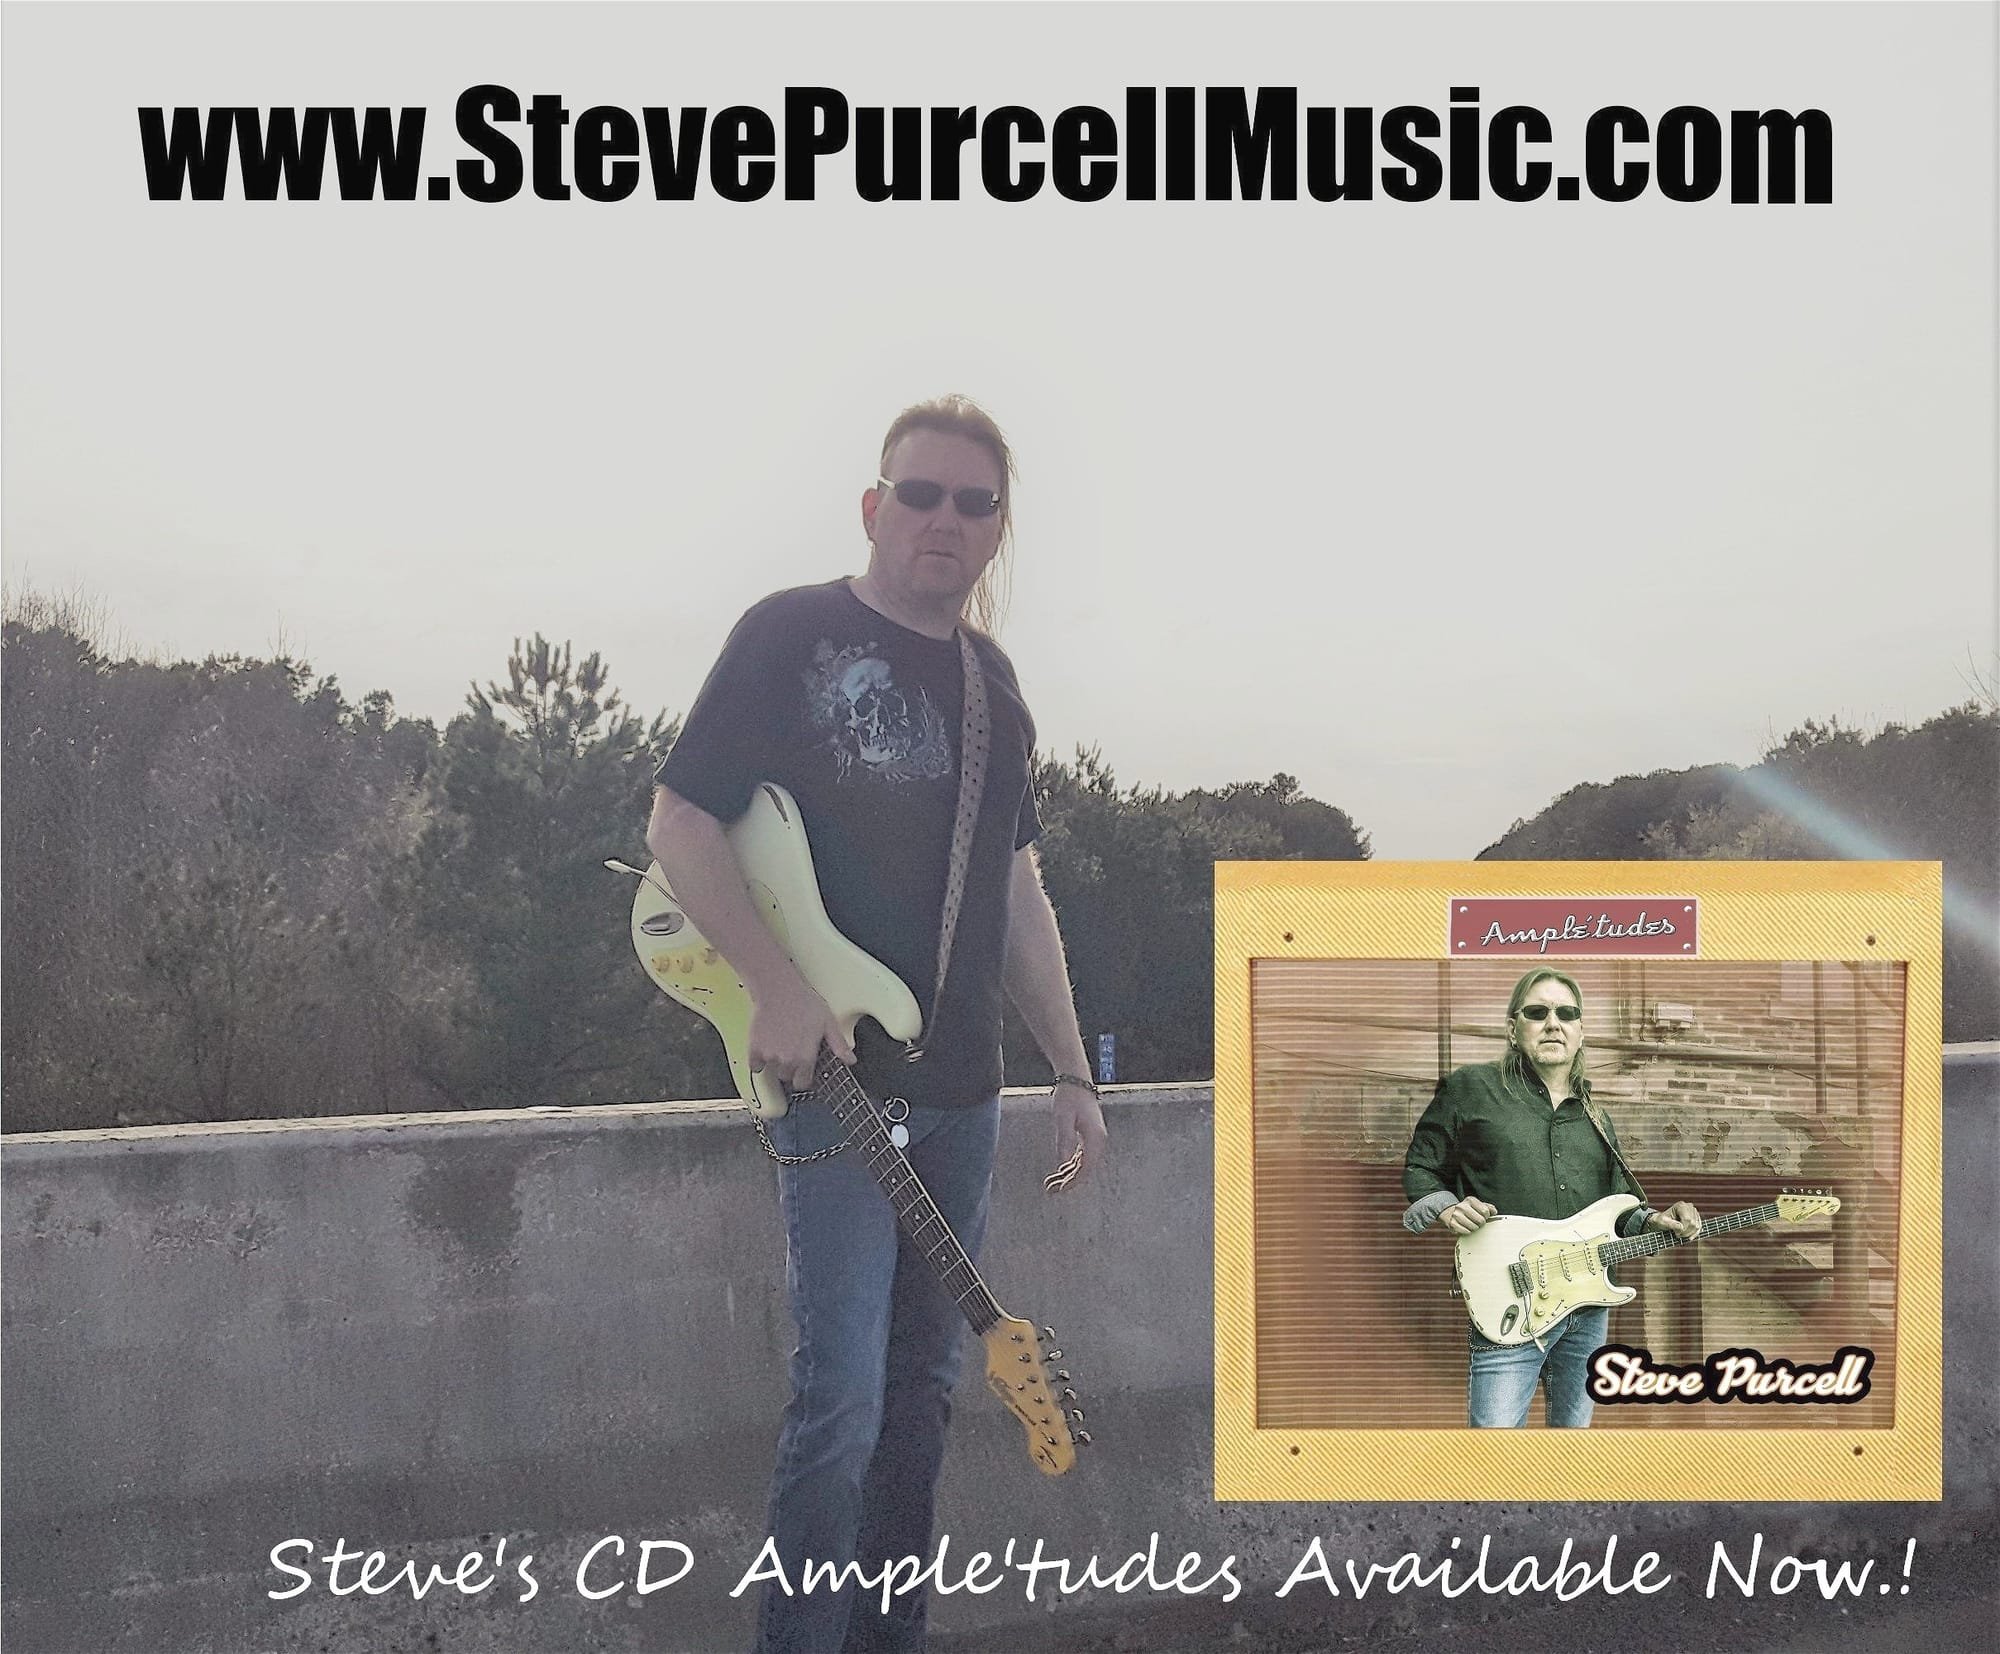 Vintage Guitar Magazine Video Shout-Out Steve Purcell